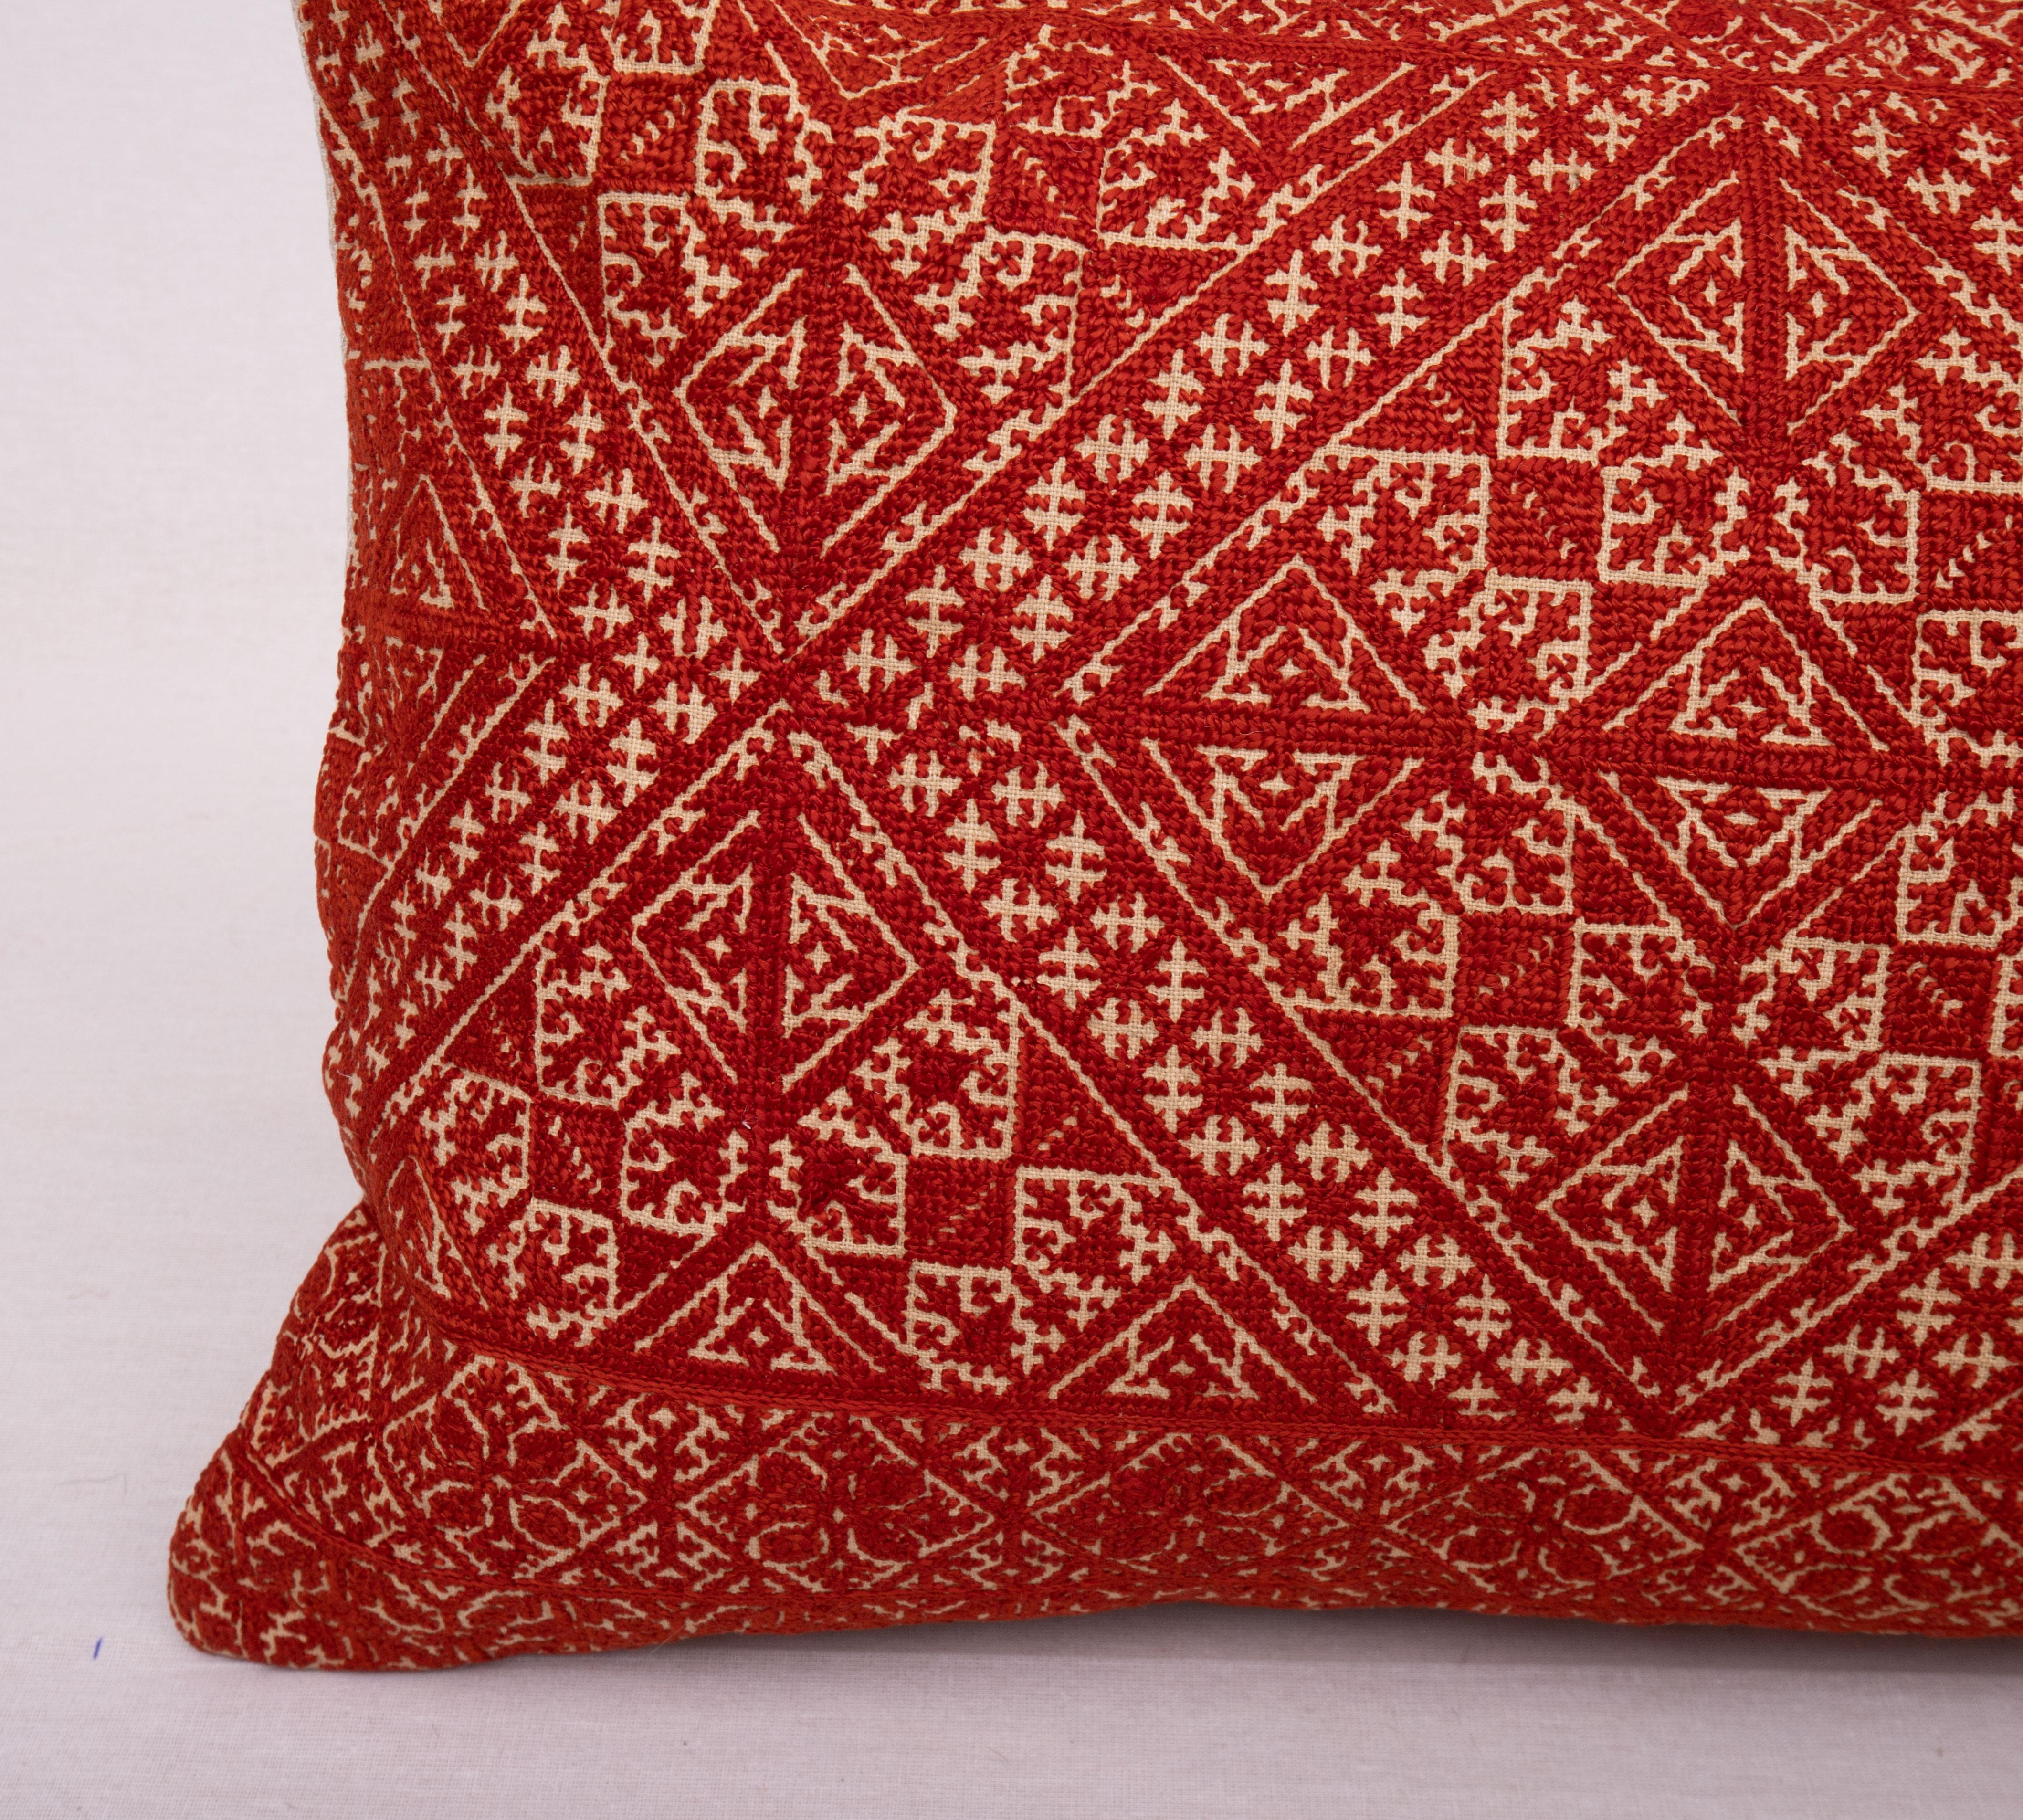 Embroidered Antique Moroccan Fez Embroidery Pillow Case, Early 20th Century